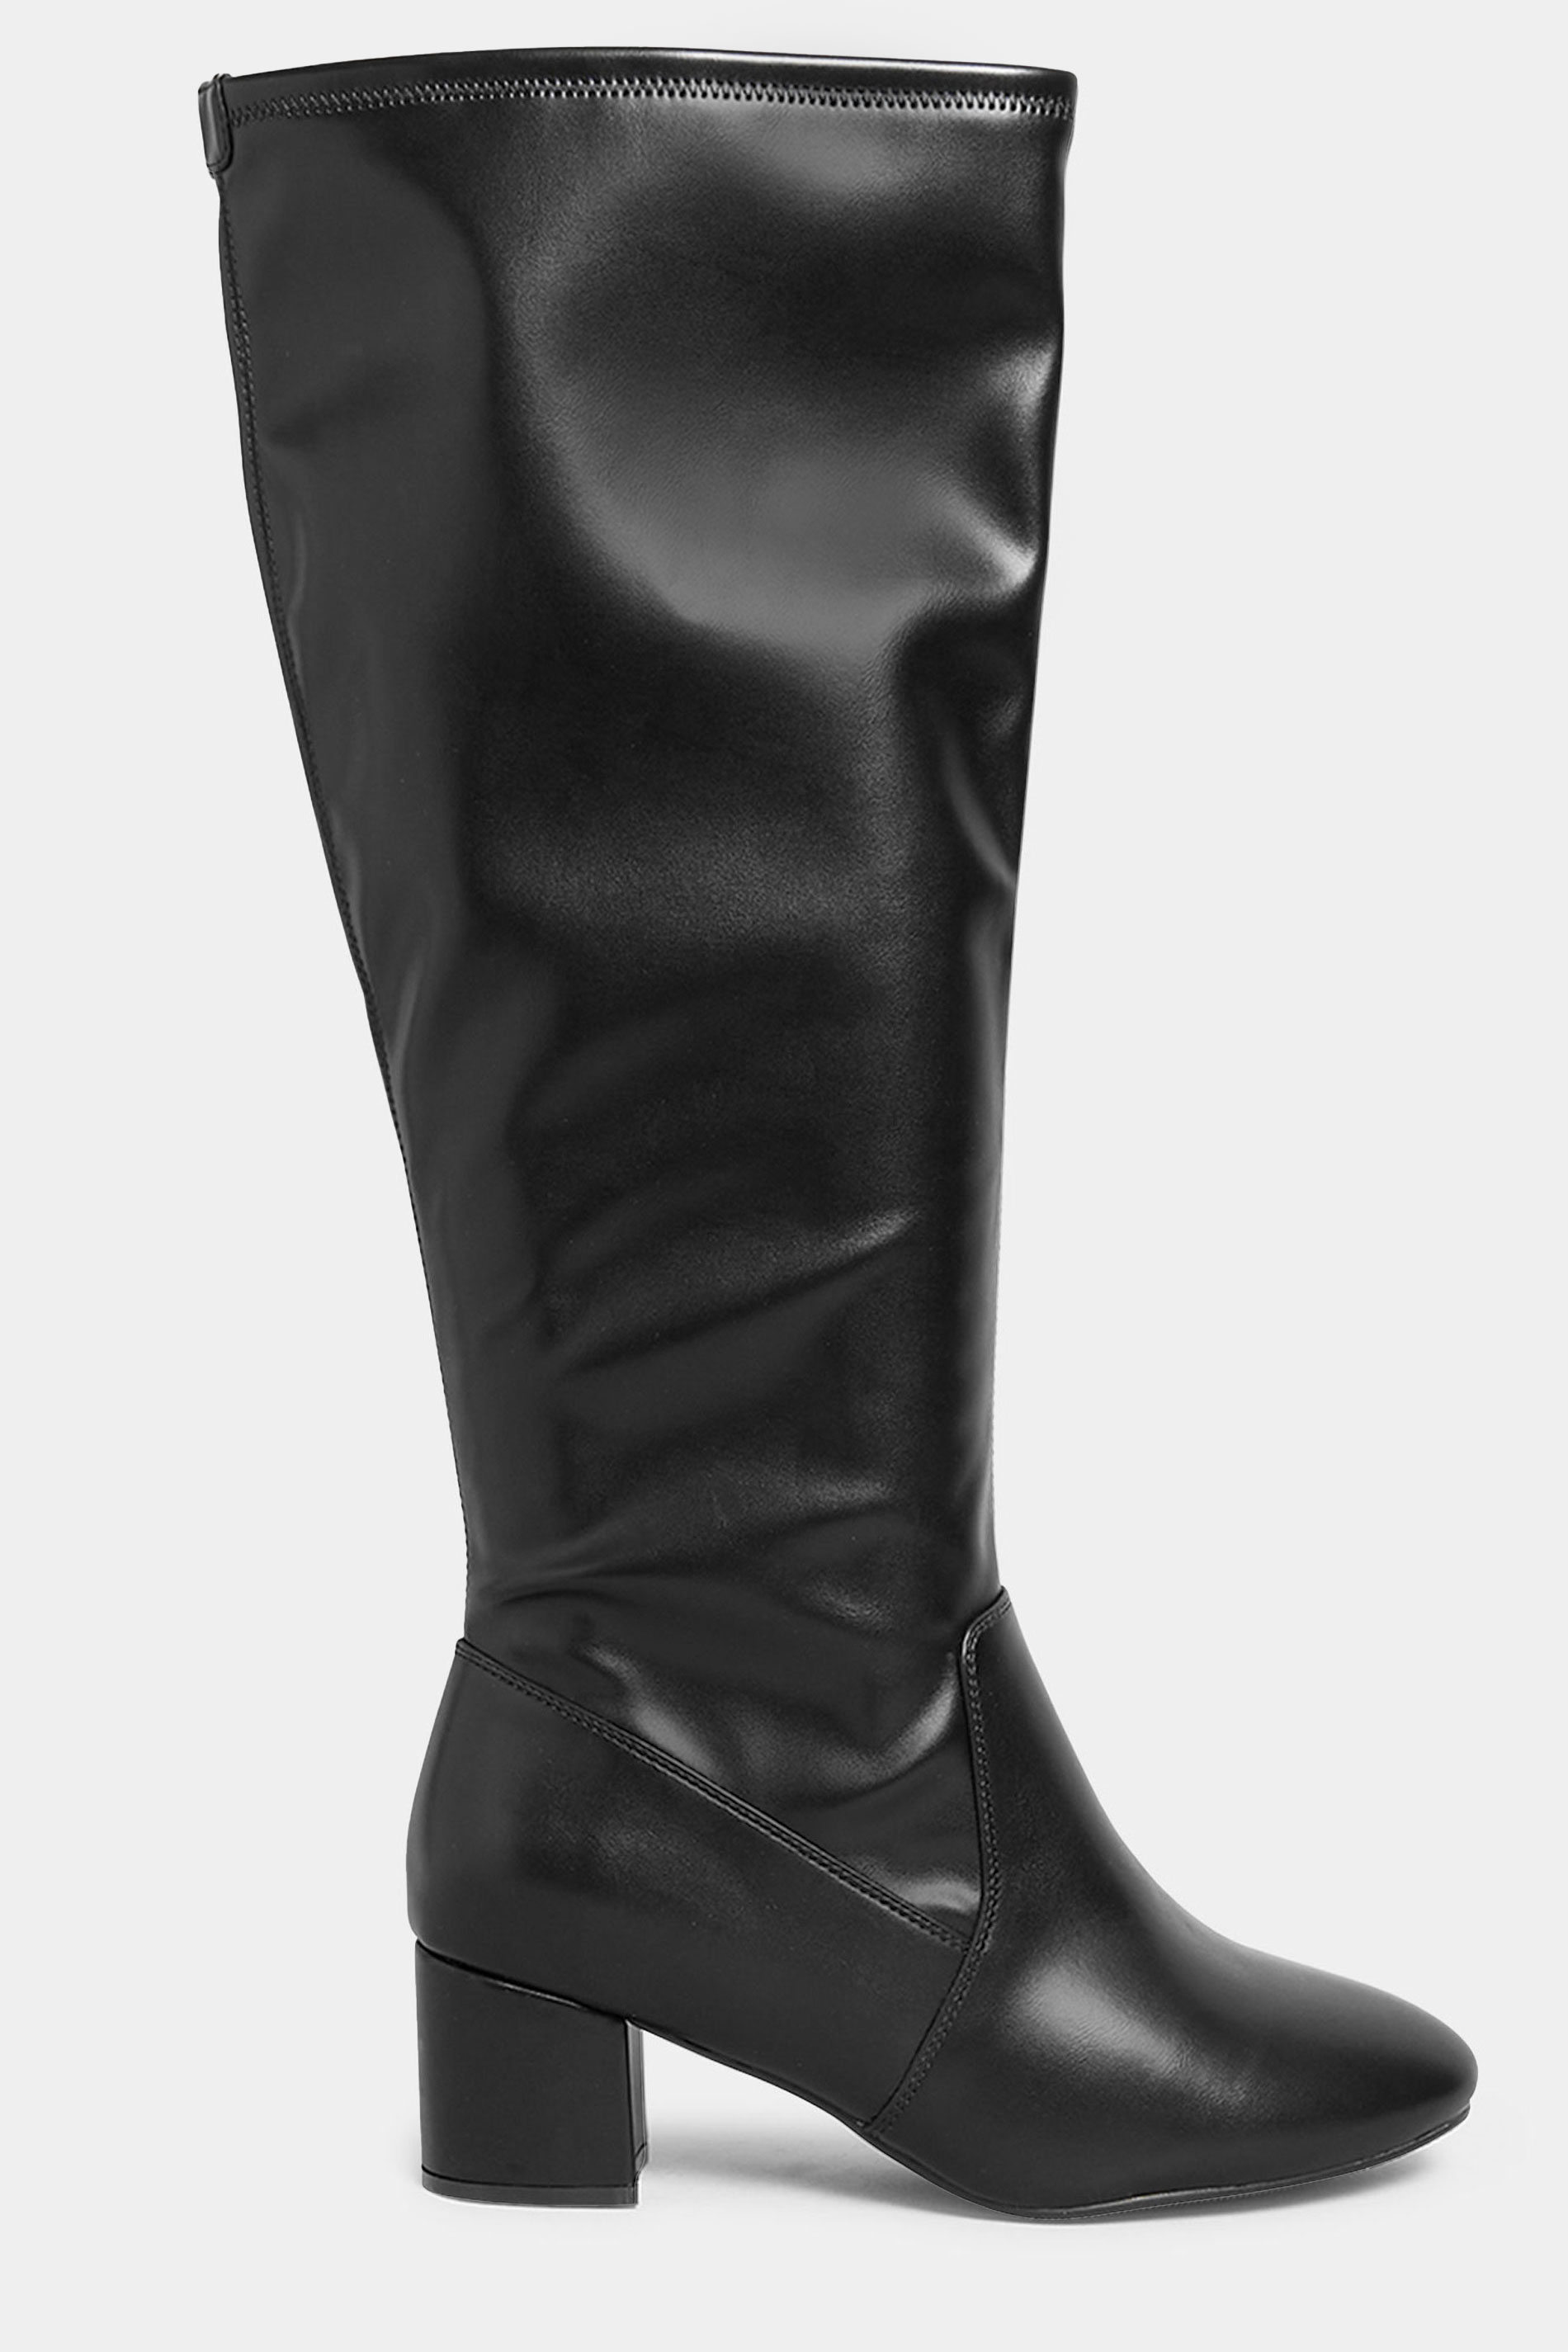 LIMITED COLLECTION Black Stretch Heeled Knee High Boots In Wide & Extra ...